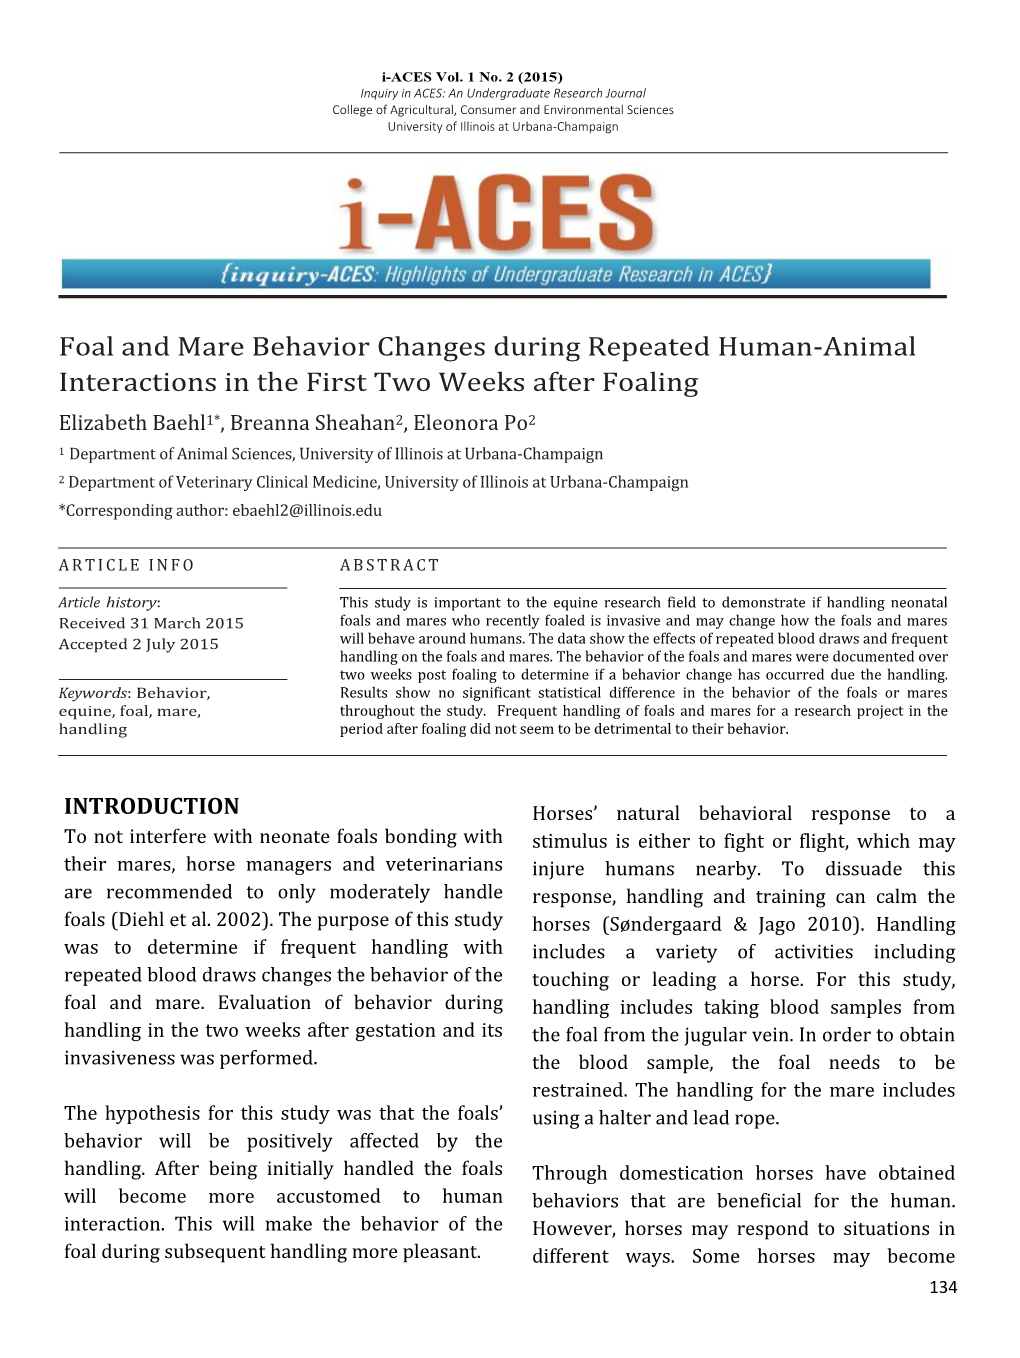 Foal and Mare Behavior Changes During Repeated Human-Animal